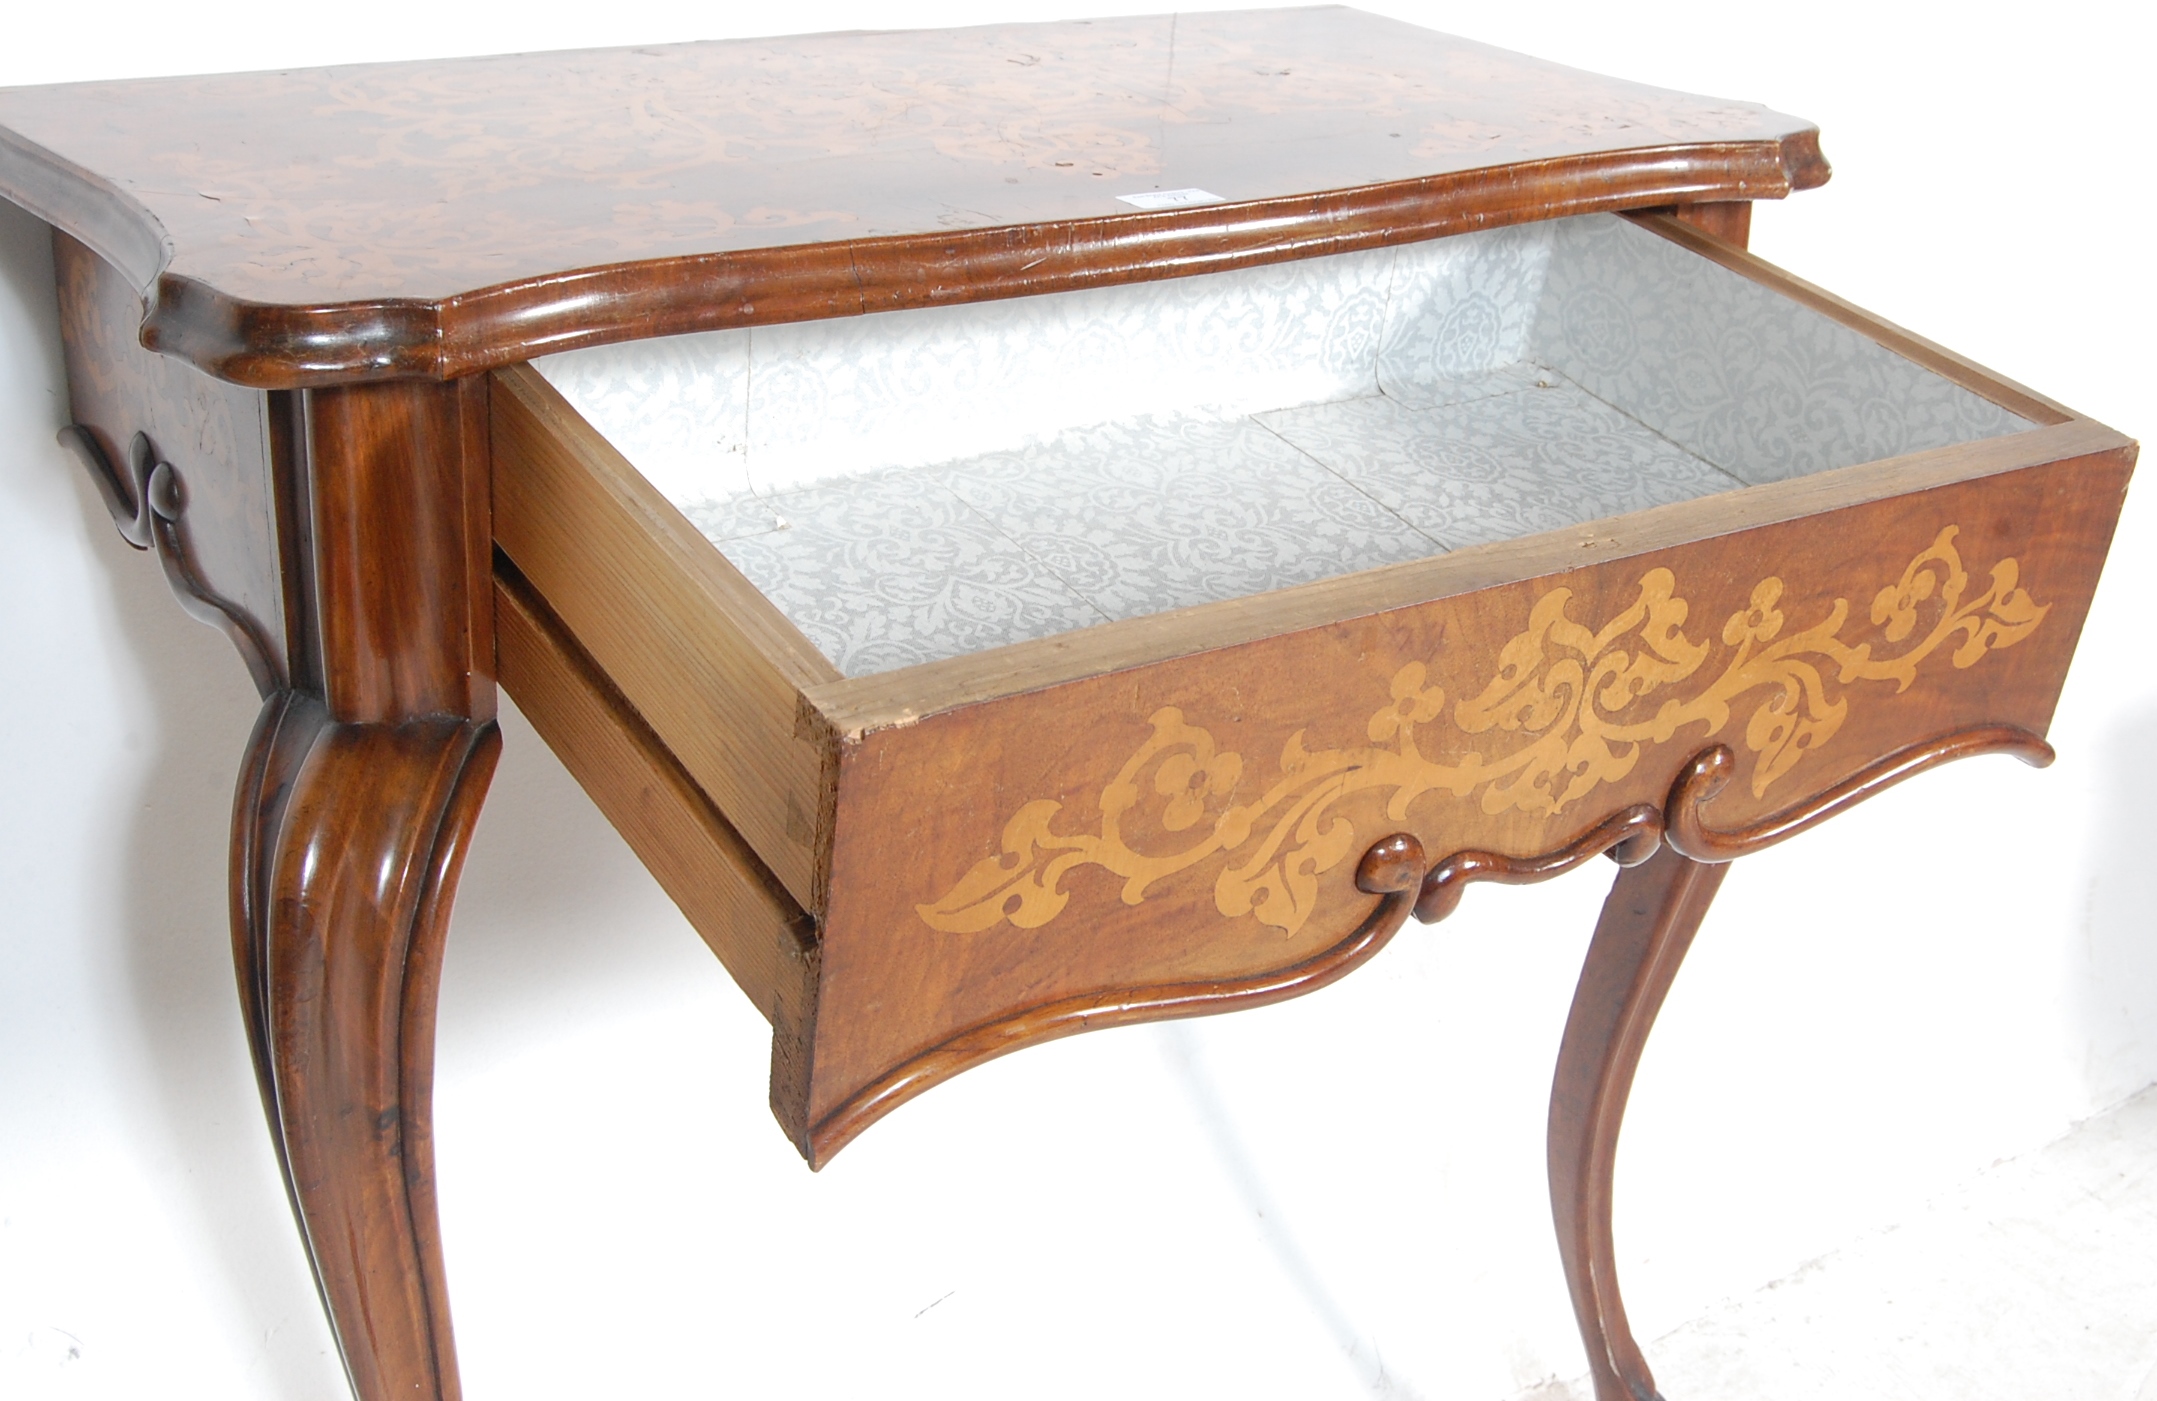 19TH CENTURY DUTCH WALNUT AND SATIN INLAID CONSOLE TABLE - Image 5 of 6